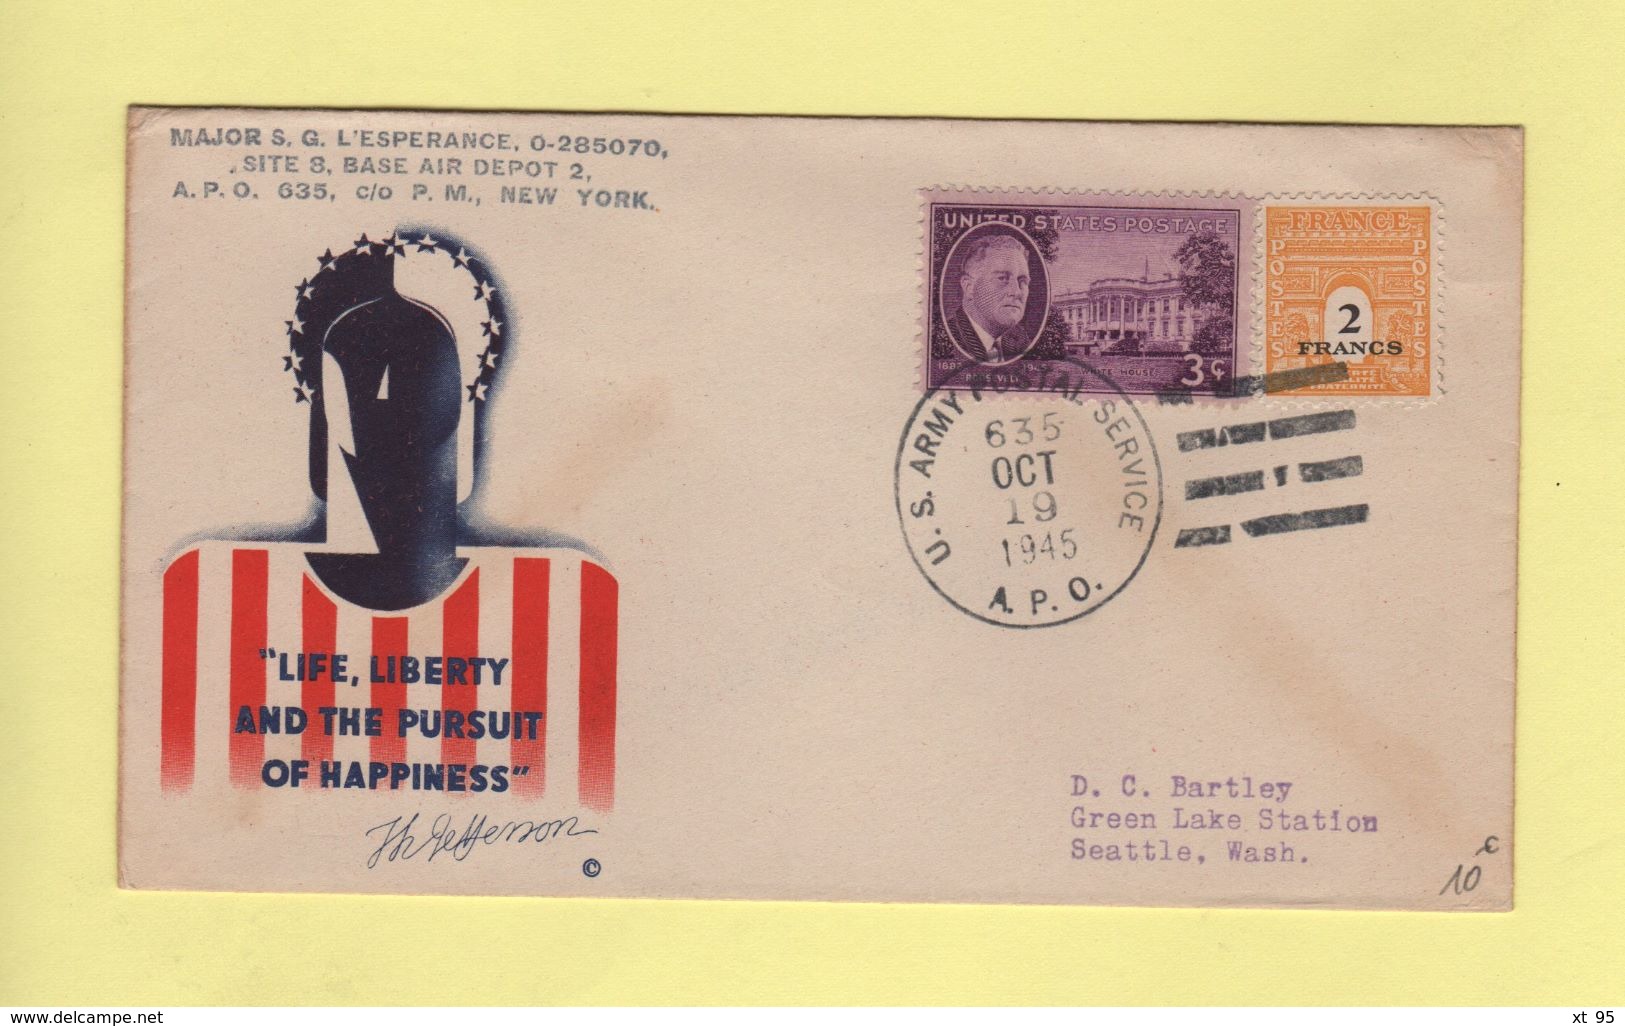 APO 635 - US Postal Army Service - 19 Oct 1945 - Mixte US France - Life Liberty And Pursuit Of Happiness - WW II